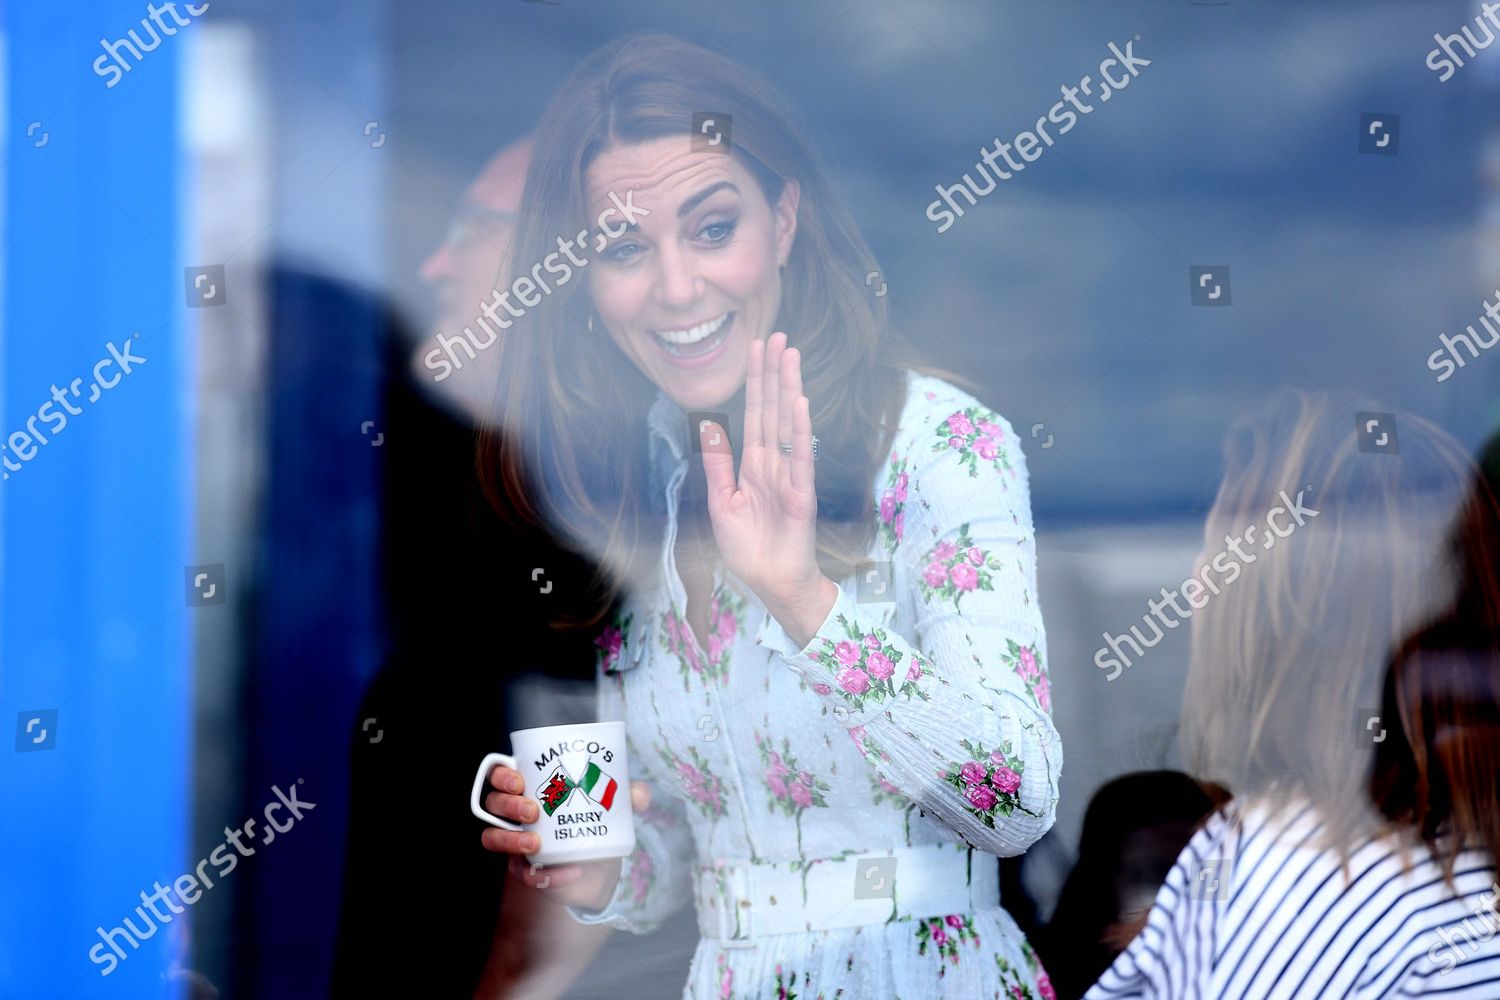 prince-william-and-catherine-duchess-of-cambridge-visit-to-barry-island-wales-uk-shutterstock-editorial-10733869ar.jpg